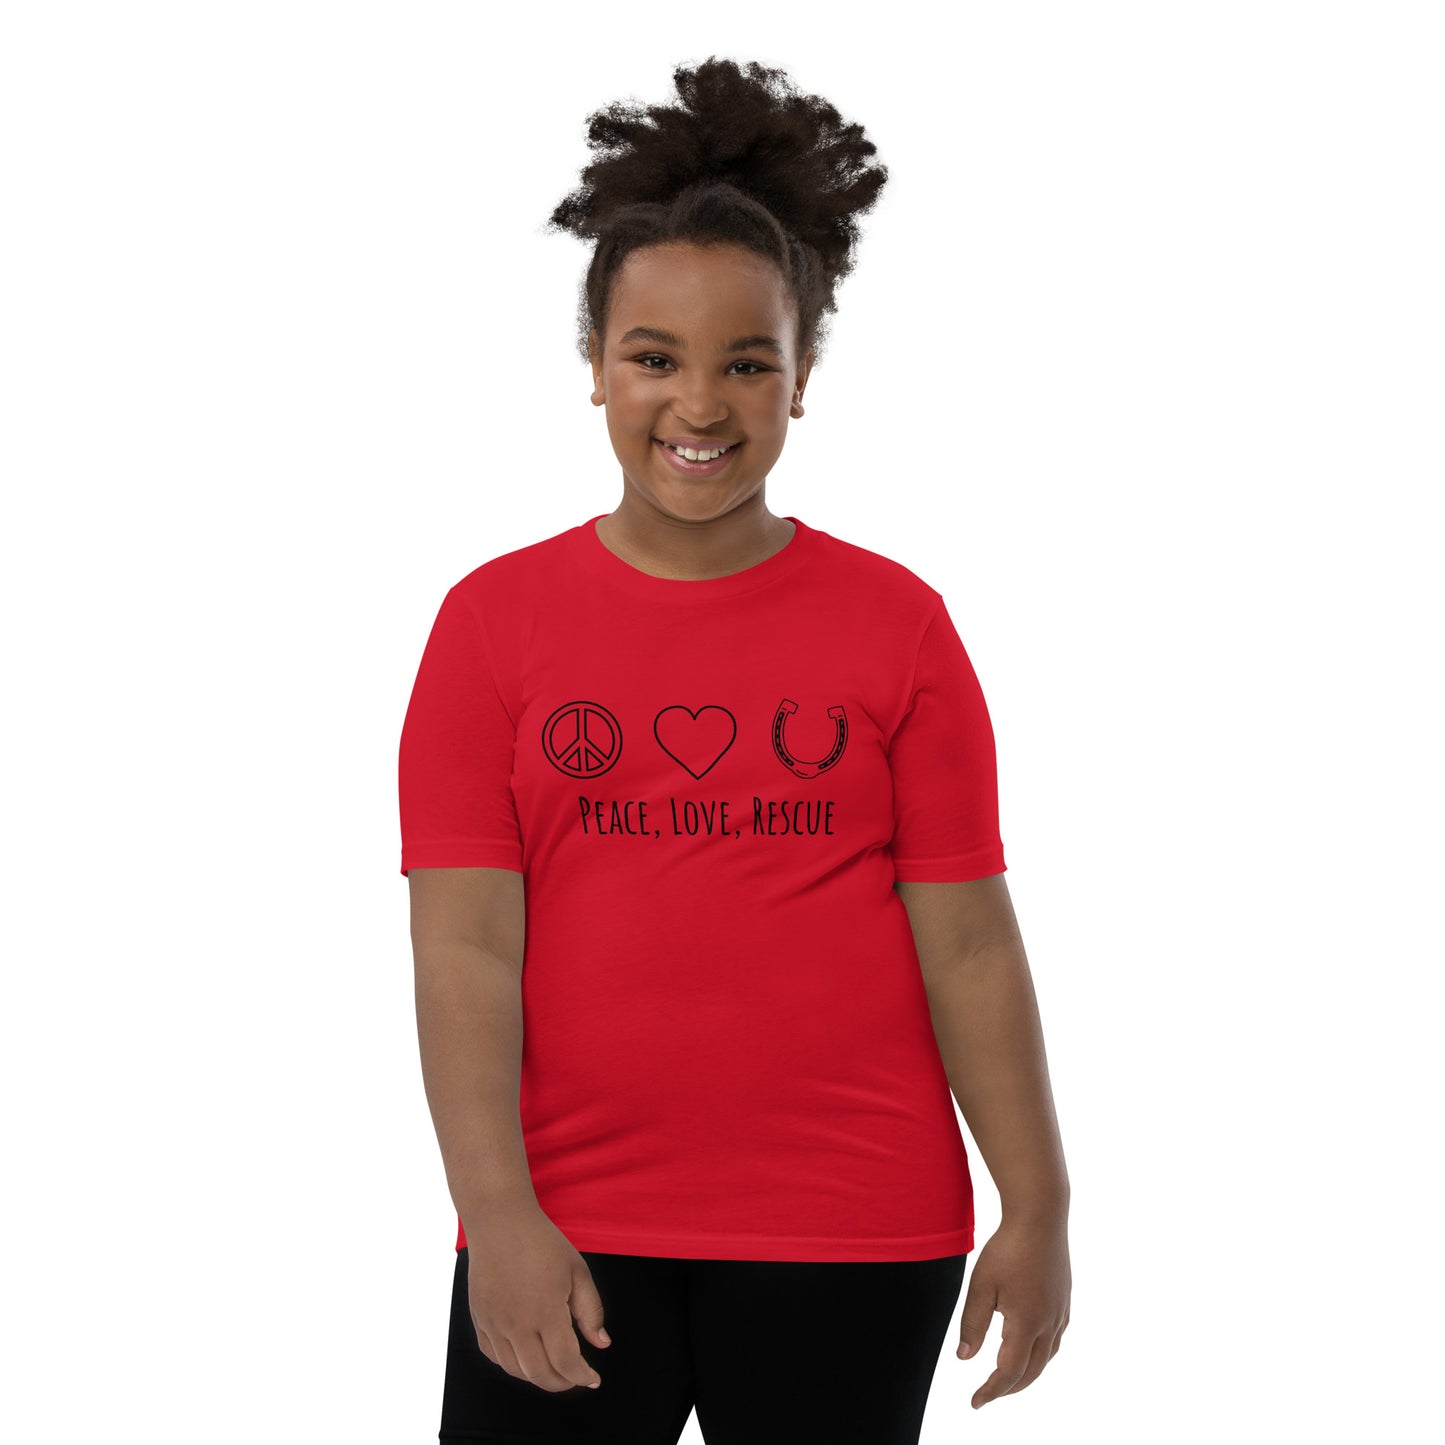 Peace, Love, Rescue - Youth tee